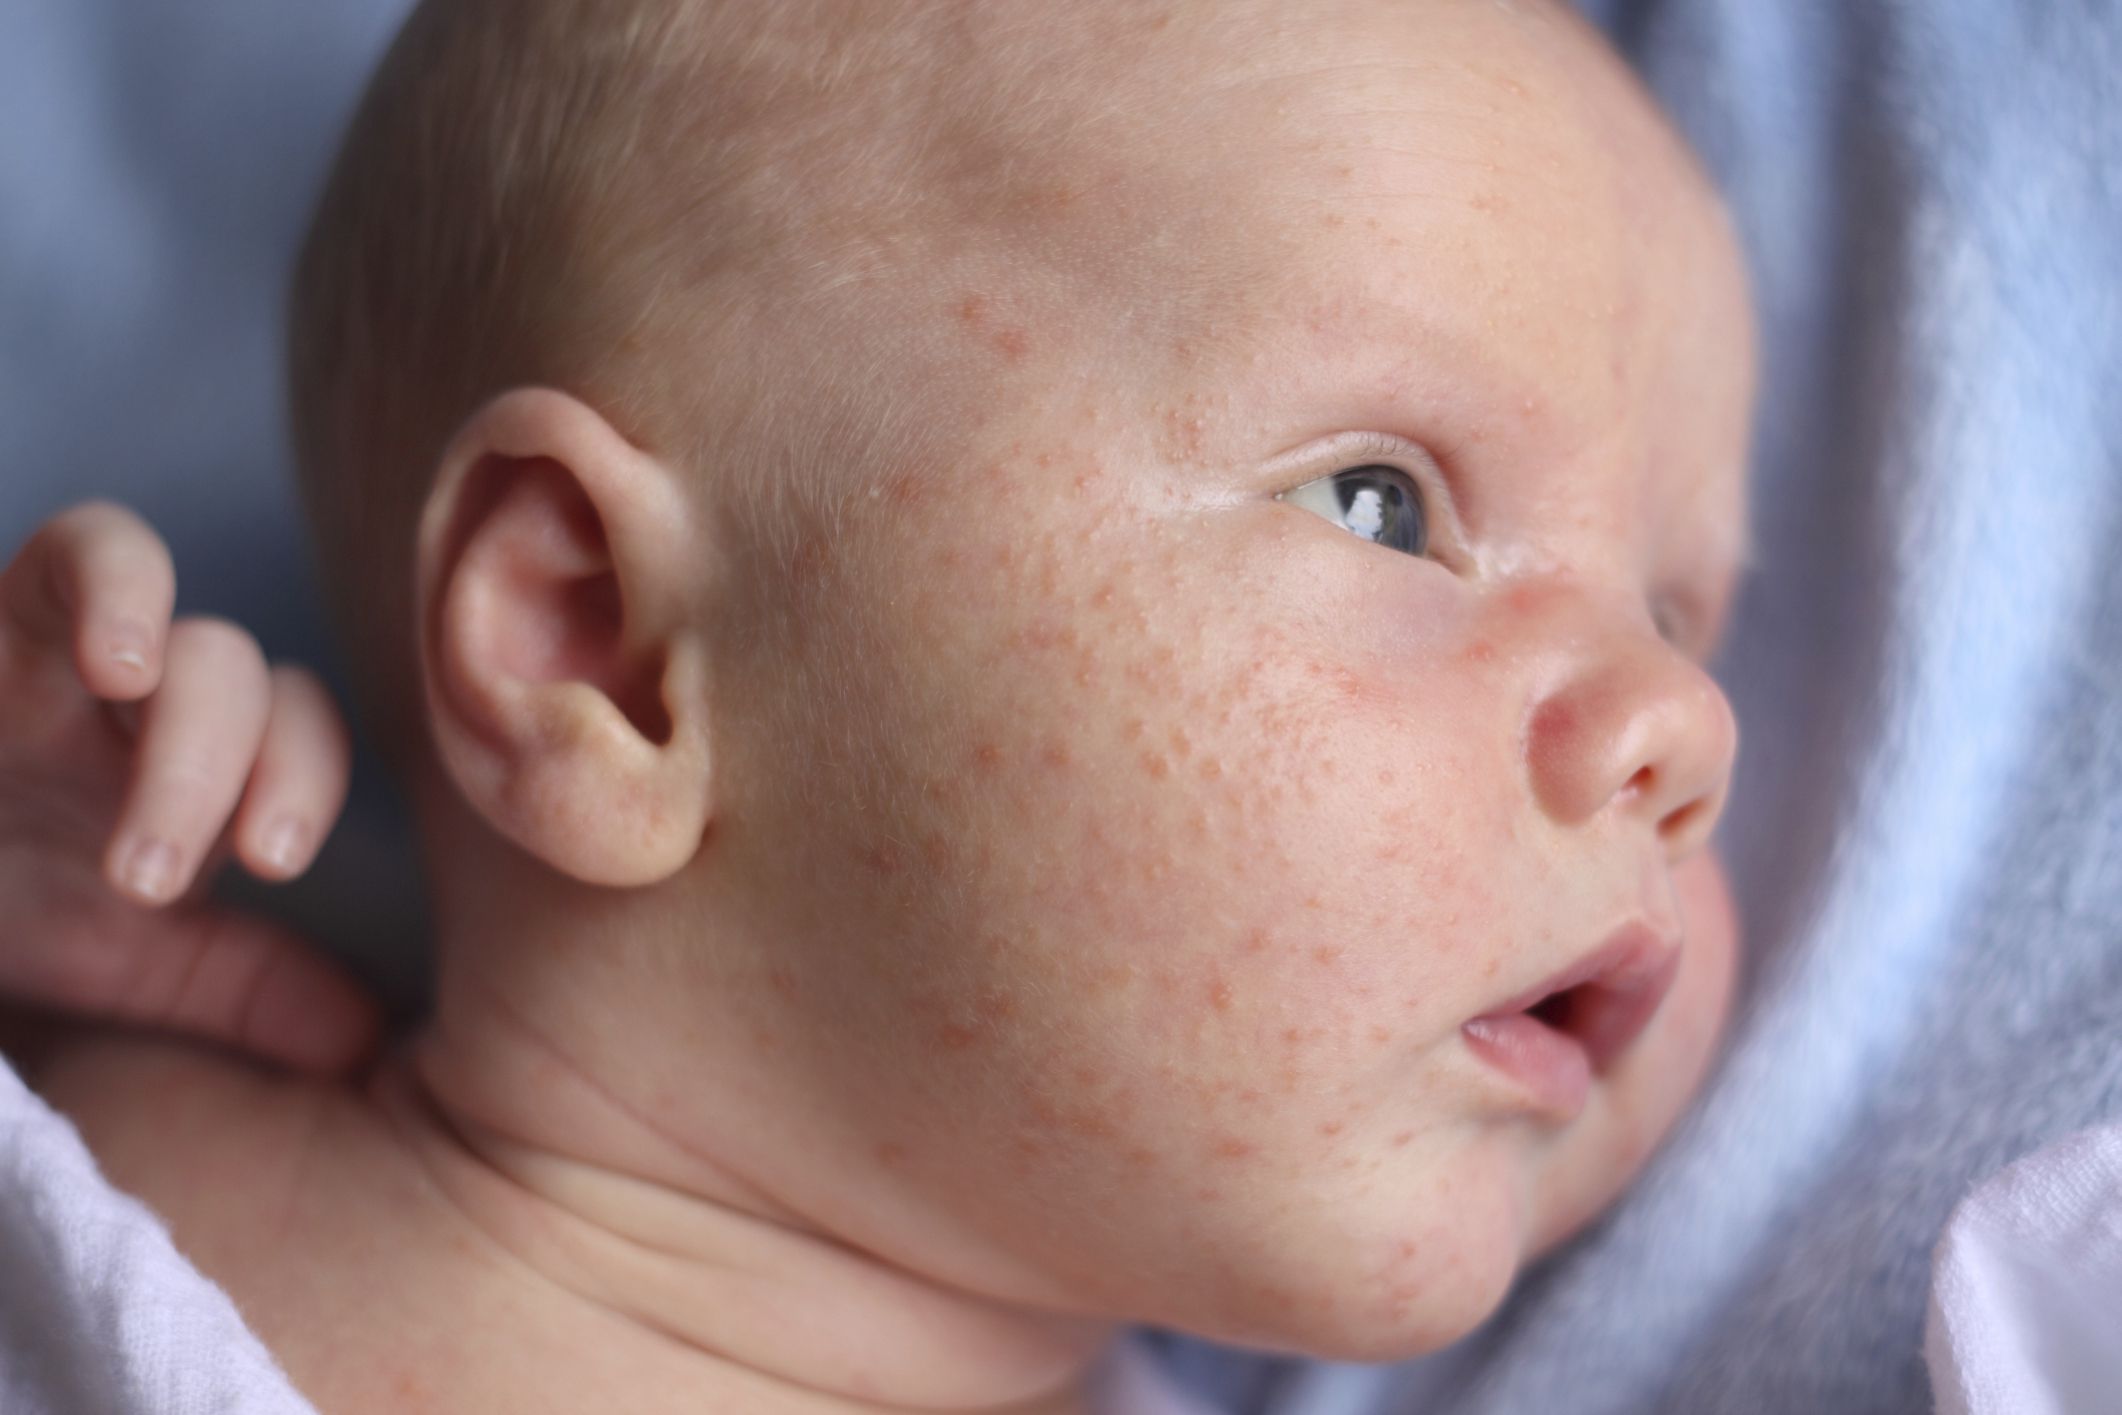 Why does my baby get pimples?